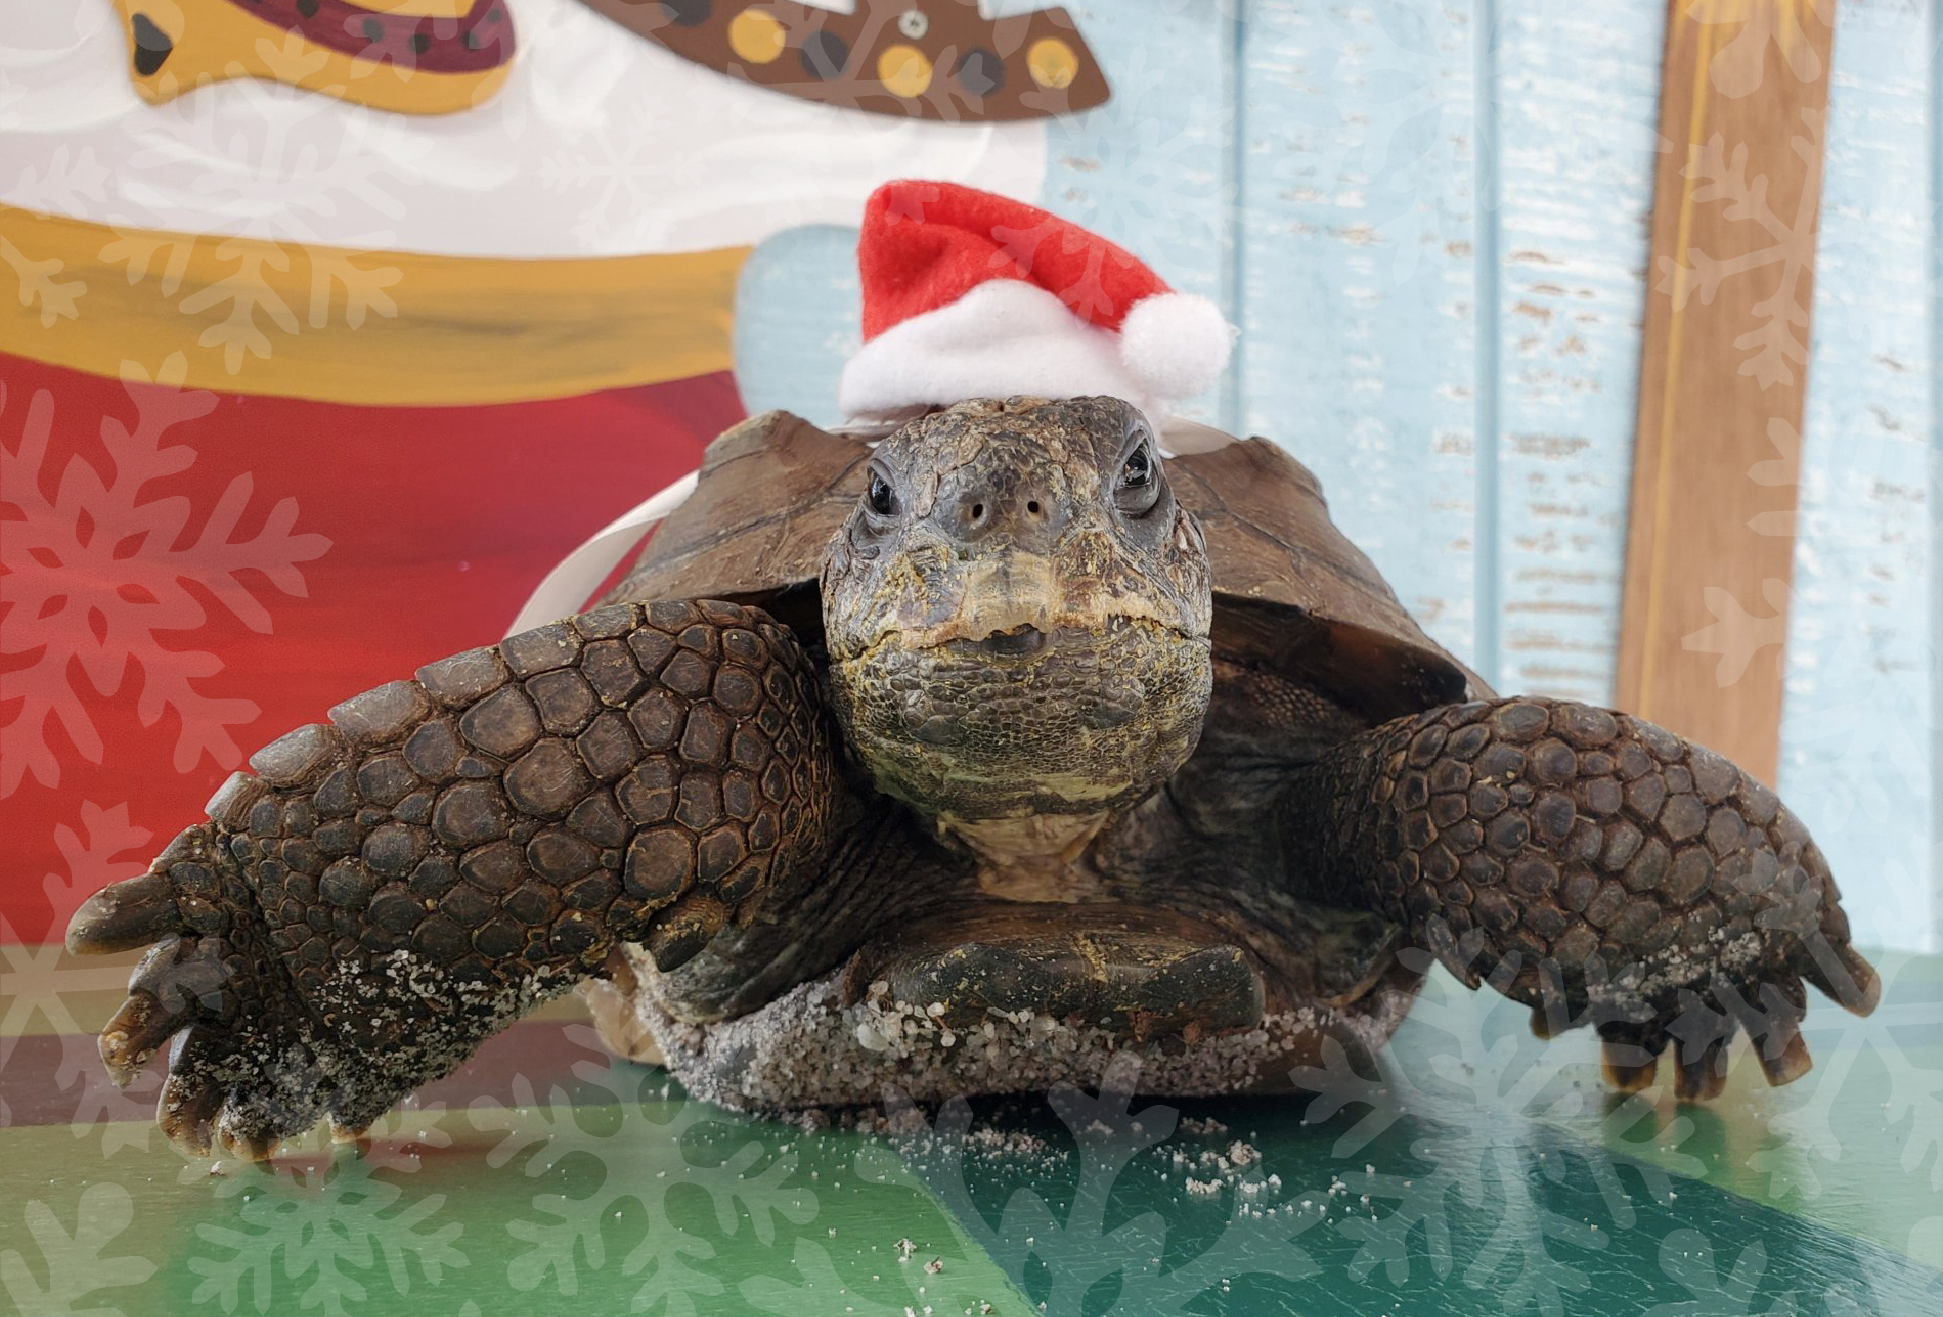 Ralph, a gopher tortoise, sits on a green floor with a Santa hat on his shell